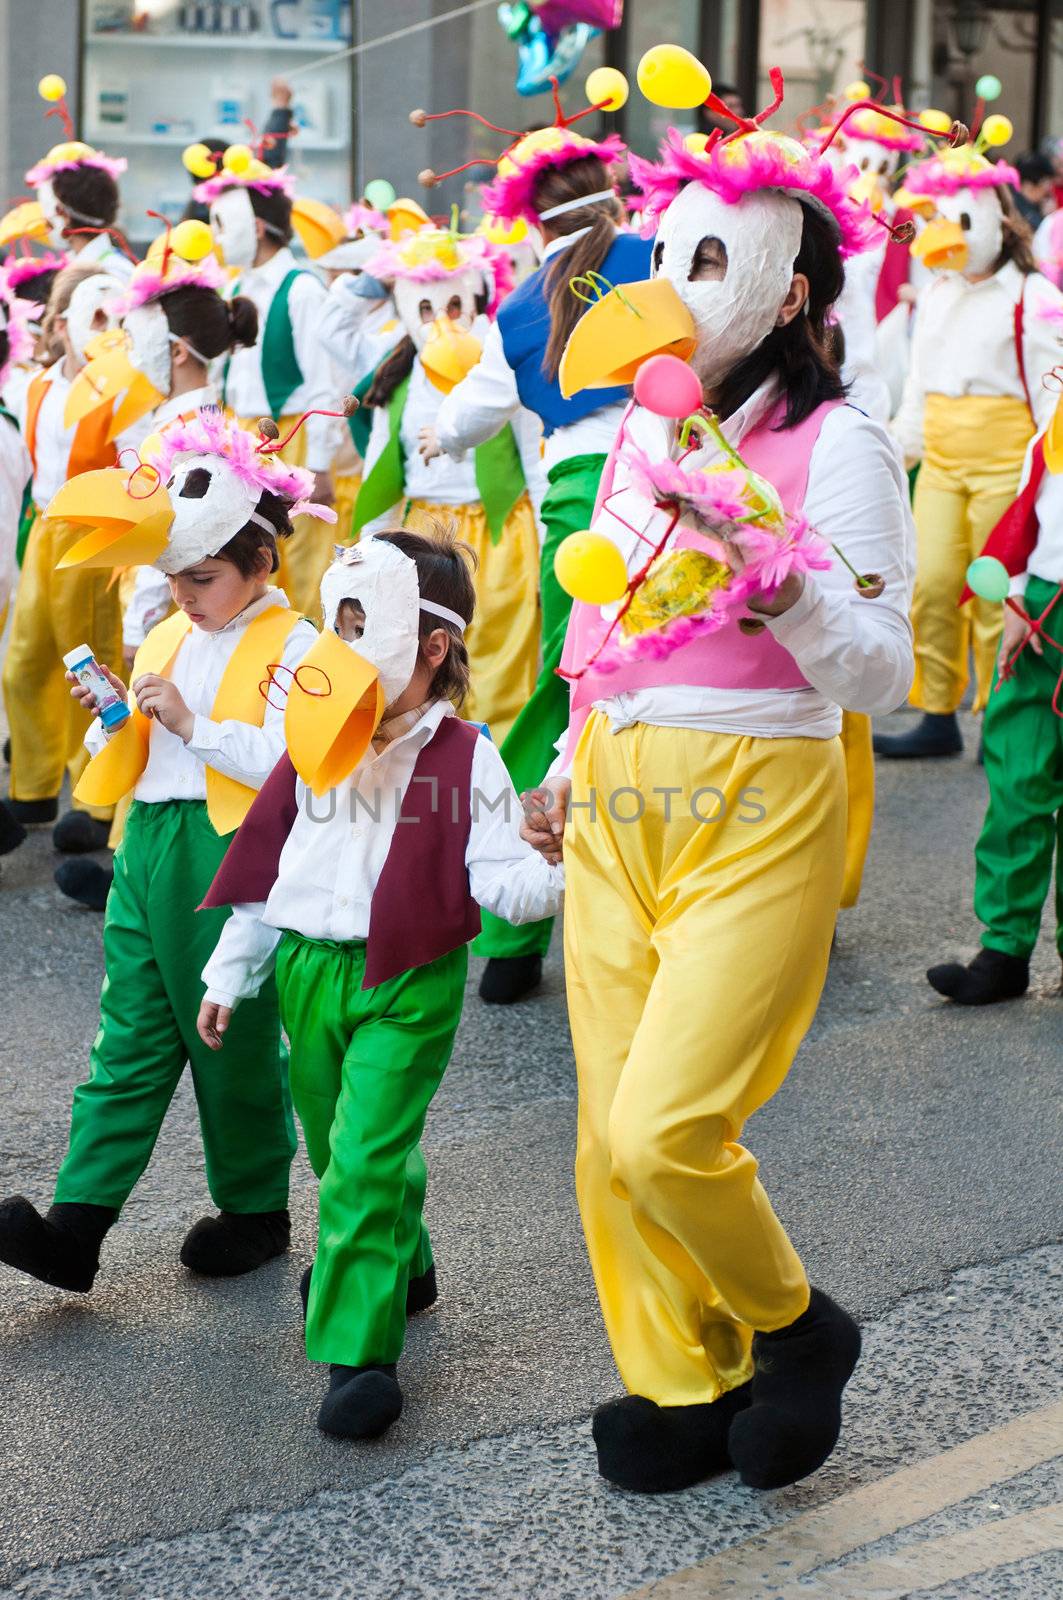 OUREM, PORTUGAL - FEBRUARY 19: unidentified people perform at the Carnival Parade on February 19, 2012 in Ourem, Portugal. The Annual Parade was held during the afternoon of February 19th 2012.